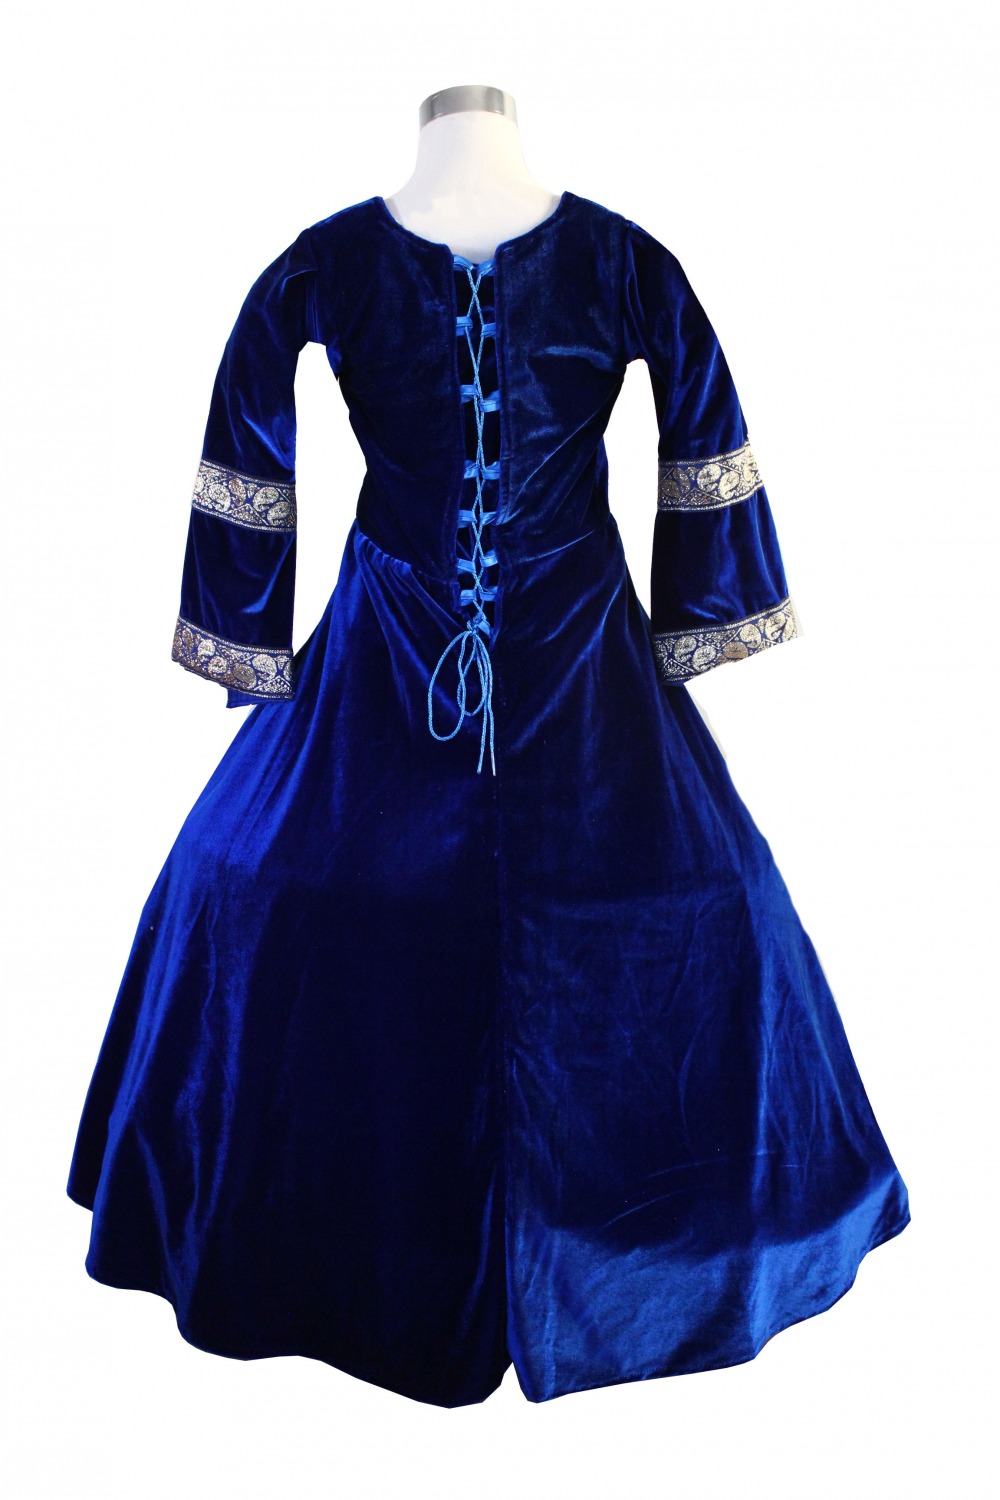 Girl's Deluxe Medieval Tudor Costume Age 9 - 11 Years Image